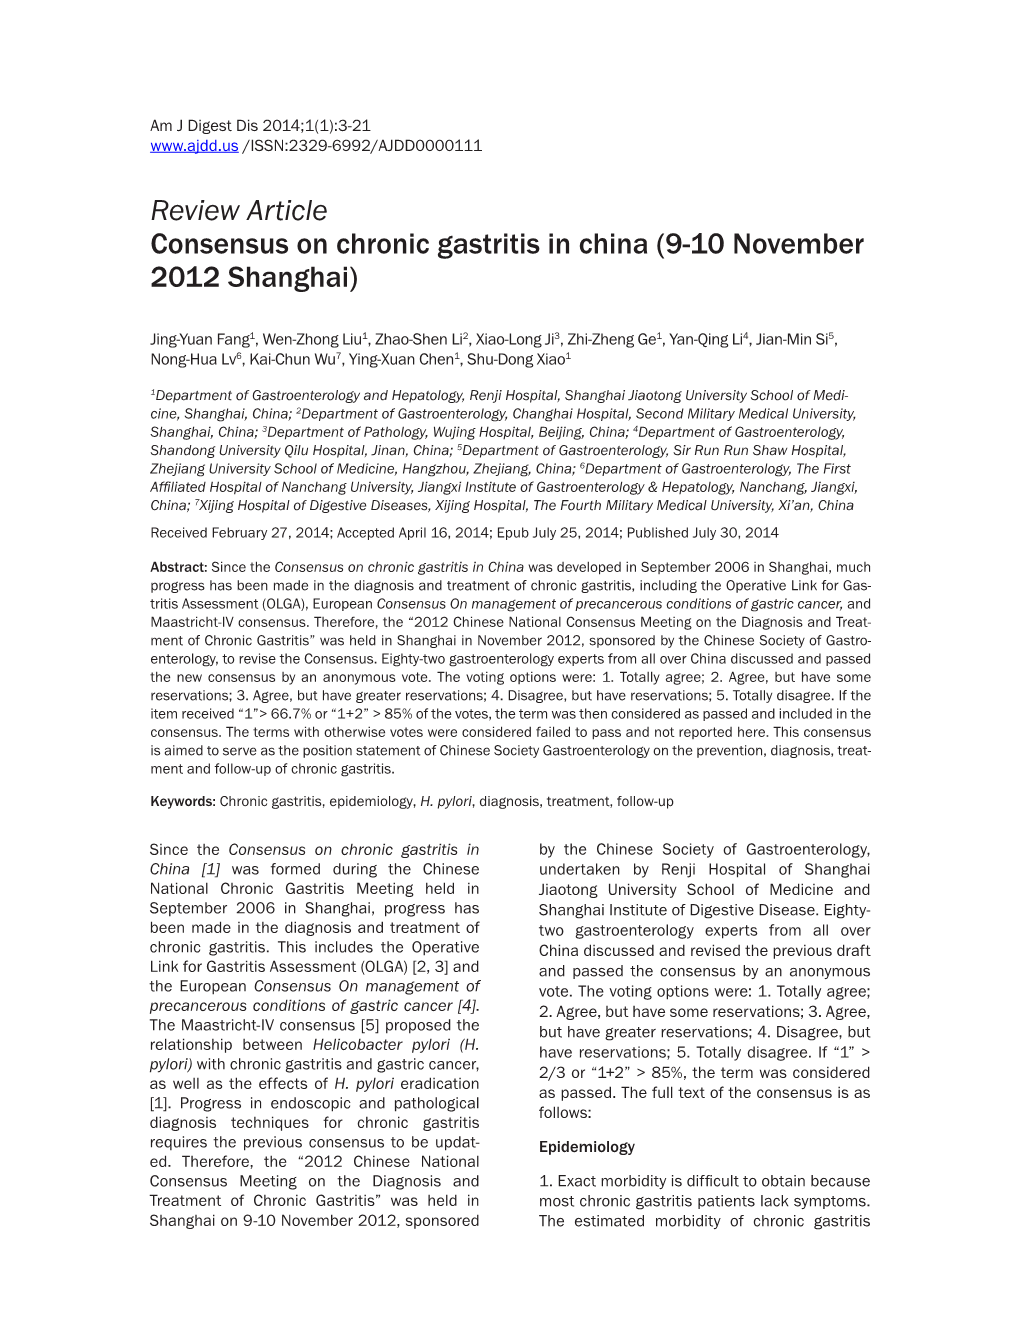 Review Article Consensus on Chronic Gastritis in China (9-10 November 2012 Shanghai)